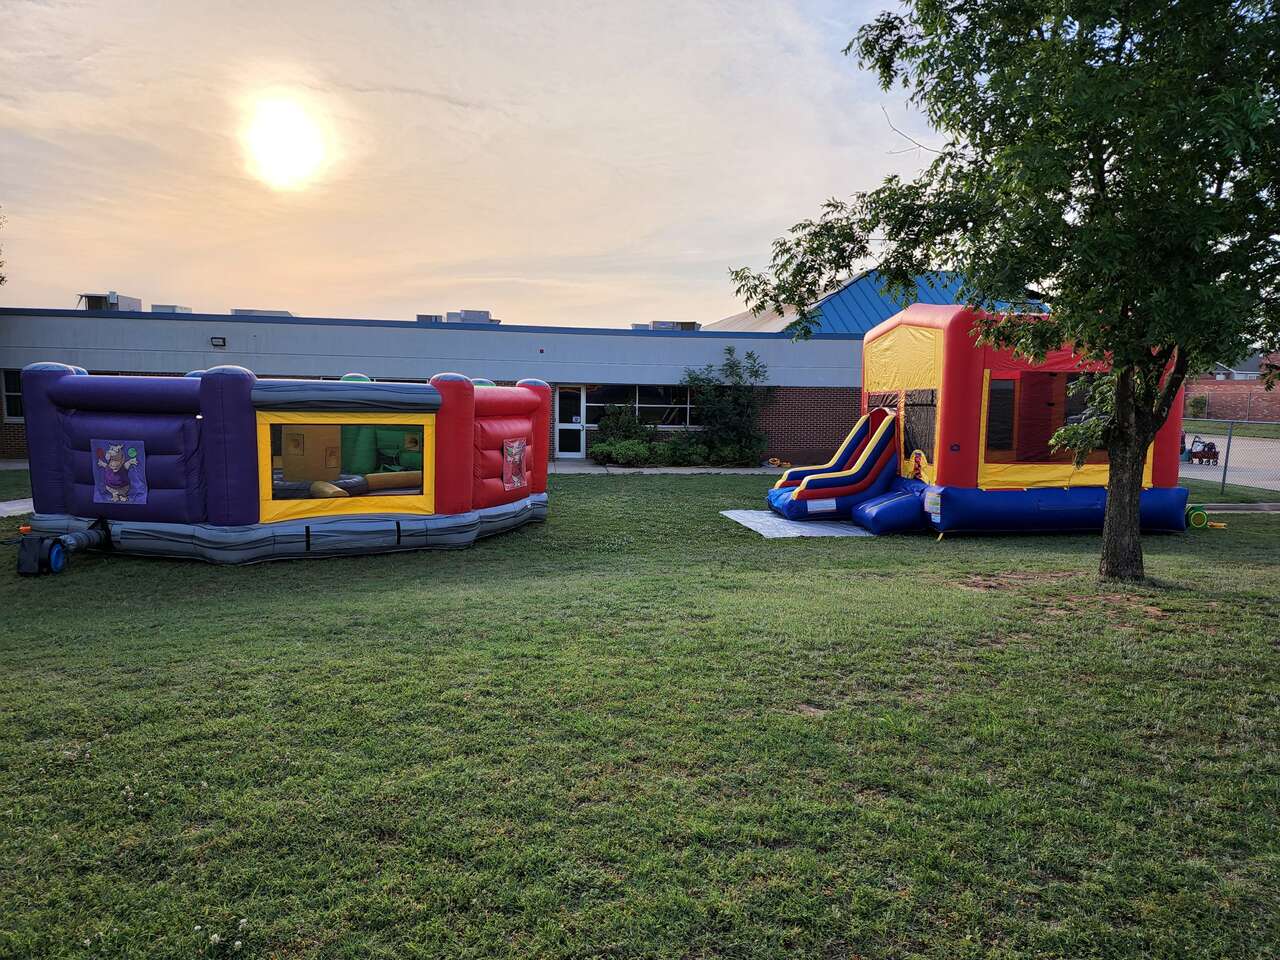 The Bounce House Rental Edmond OK Uses at Events Year-Round